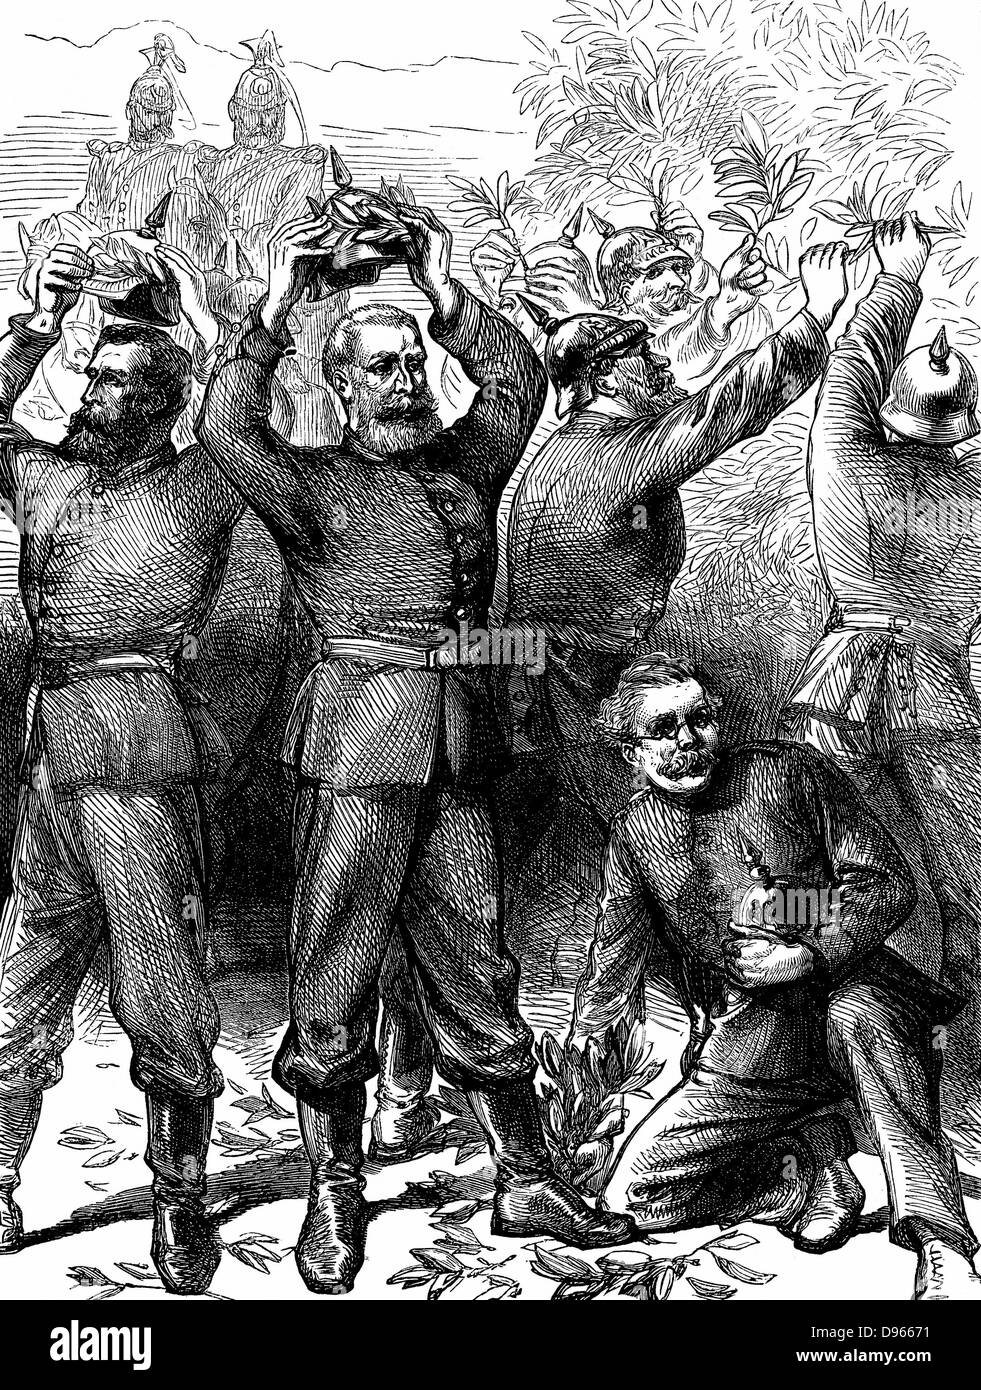 Franco-Prussian War 1870-1871: German troops in Paris crowning themselves with laurels in the Tuileries gardens, March 1871. Wood engraving c1880. Stock Photo